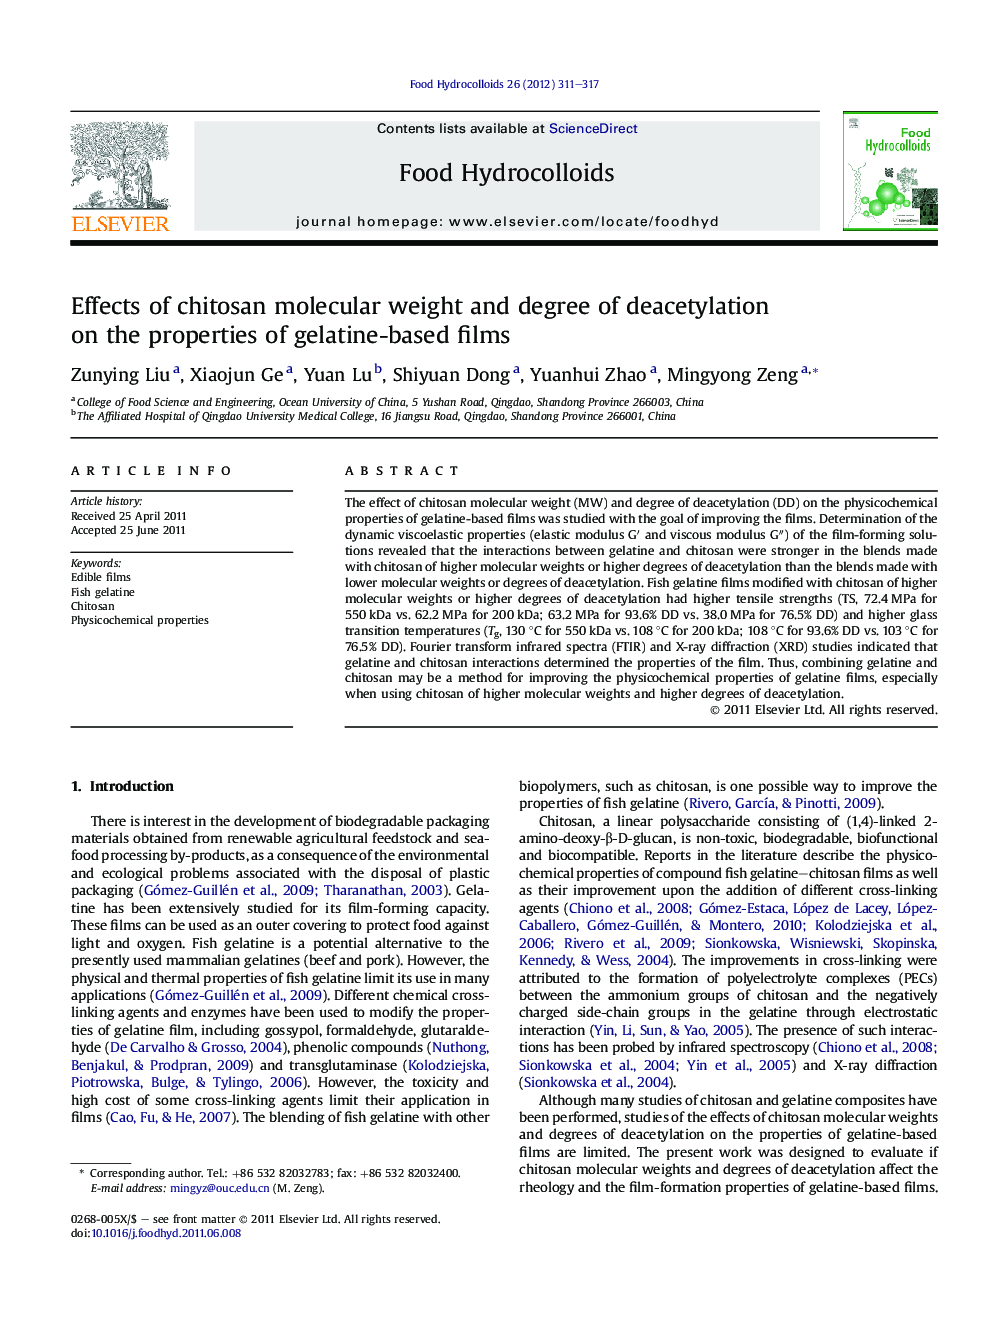 Effects of chitosan molecular weight and degree of deacetylation on the properties of gelatine-based films